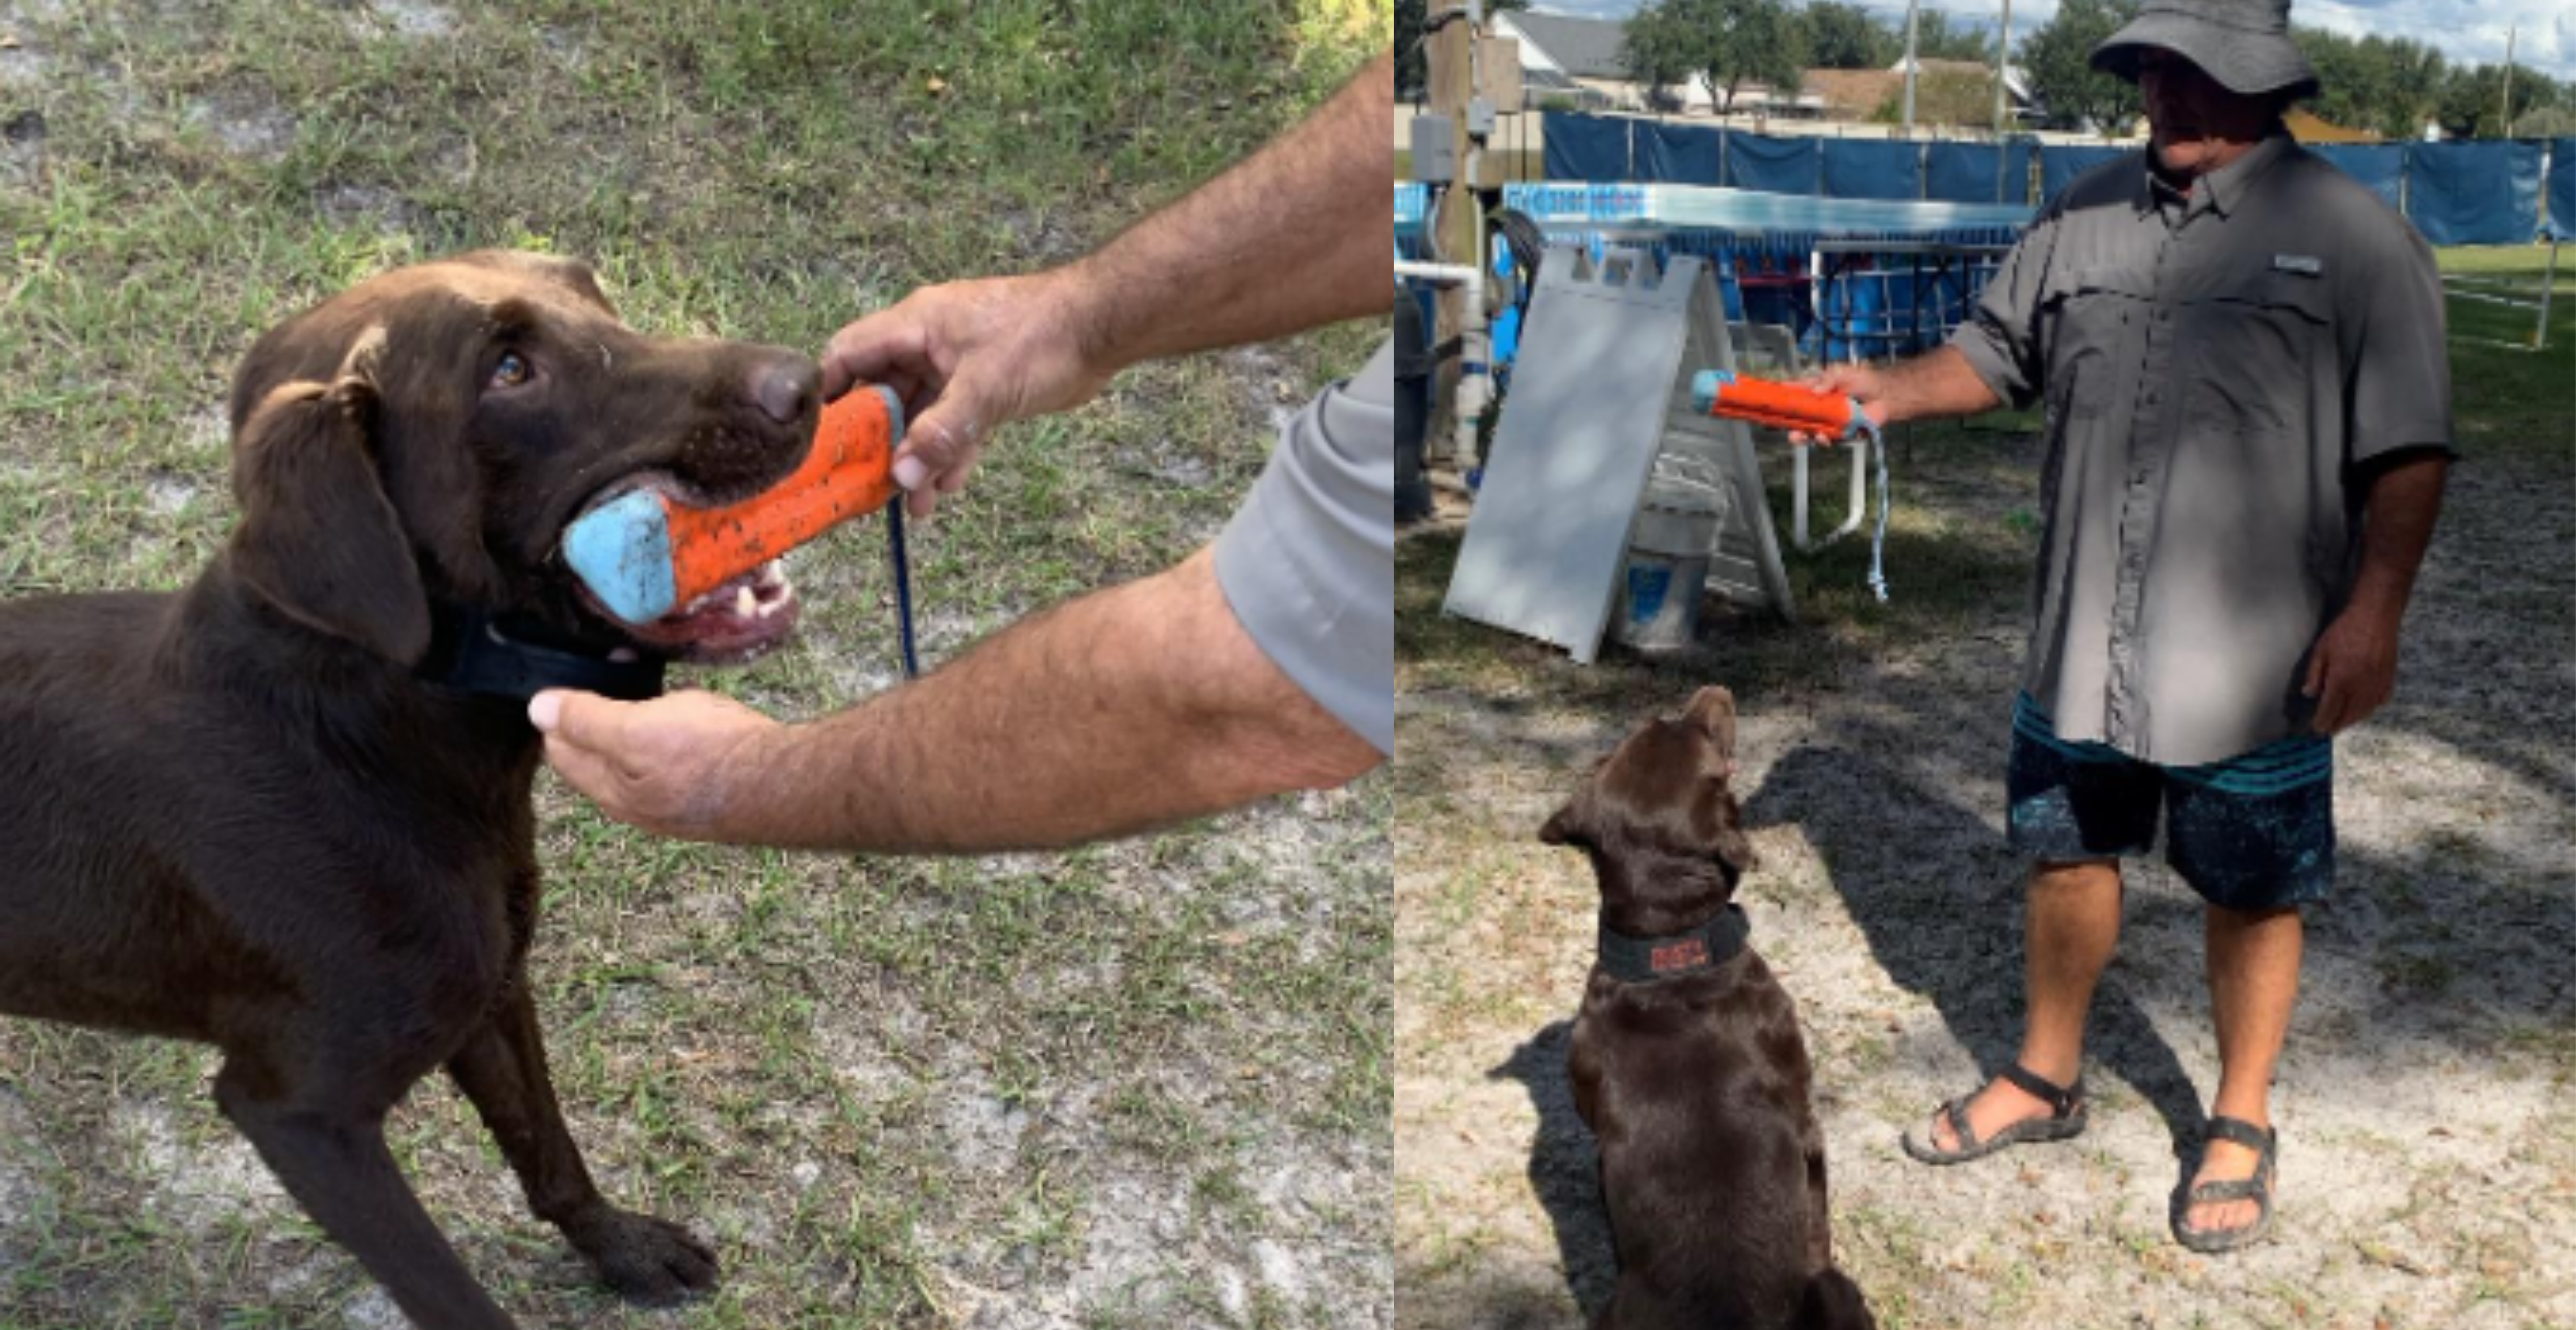 On left, dog holding toy with instructor. On right, dog watching toy that instructor is holding.